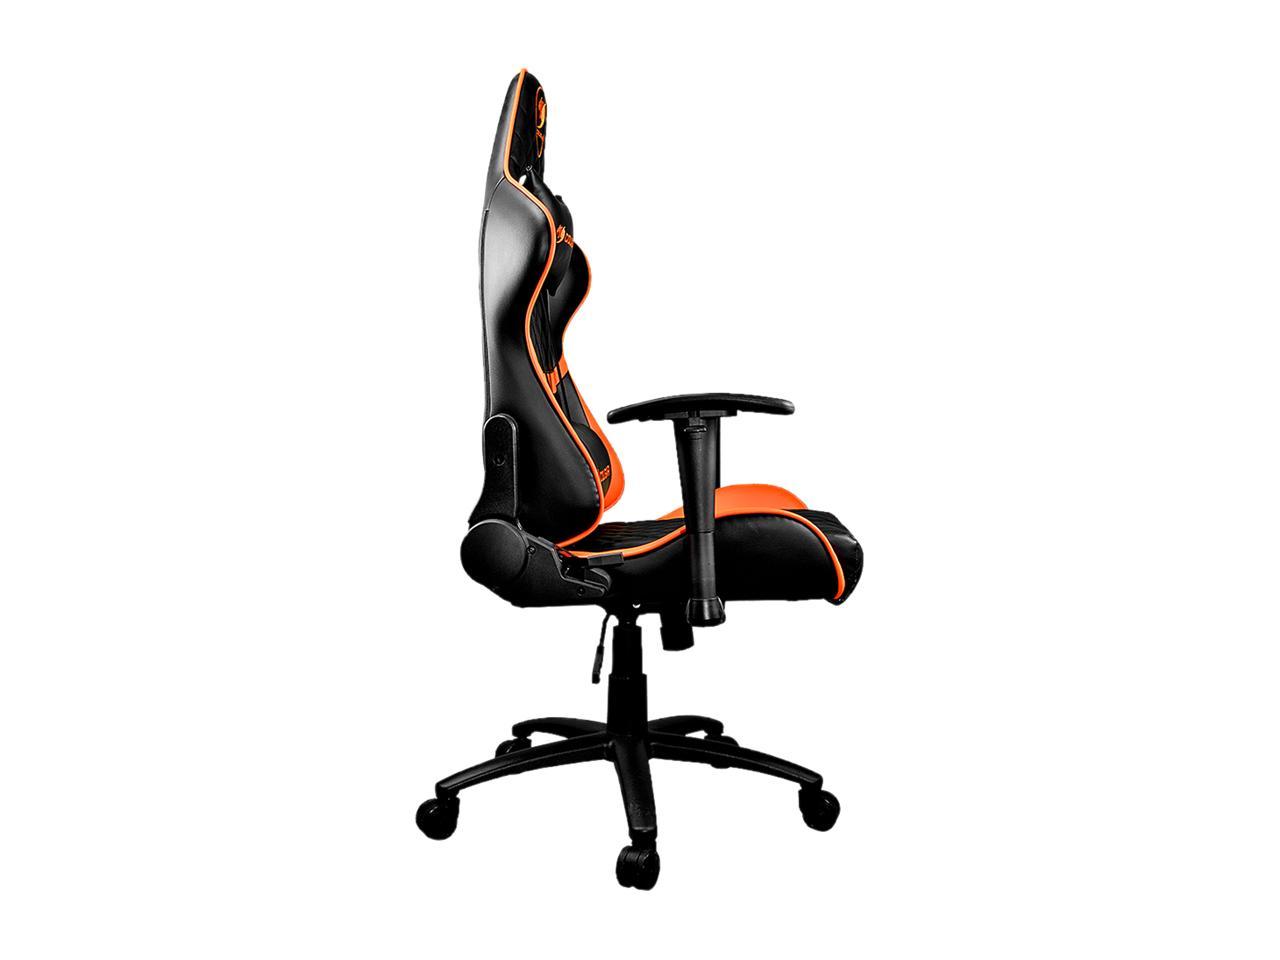 Cougar Armor One (Orange) Gaming Chair with Breathable Premium PVC Leather and Body-embracing High Back Design